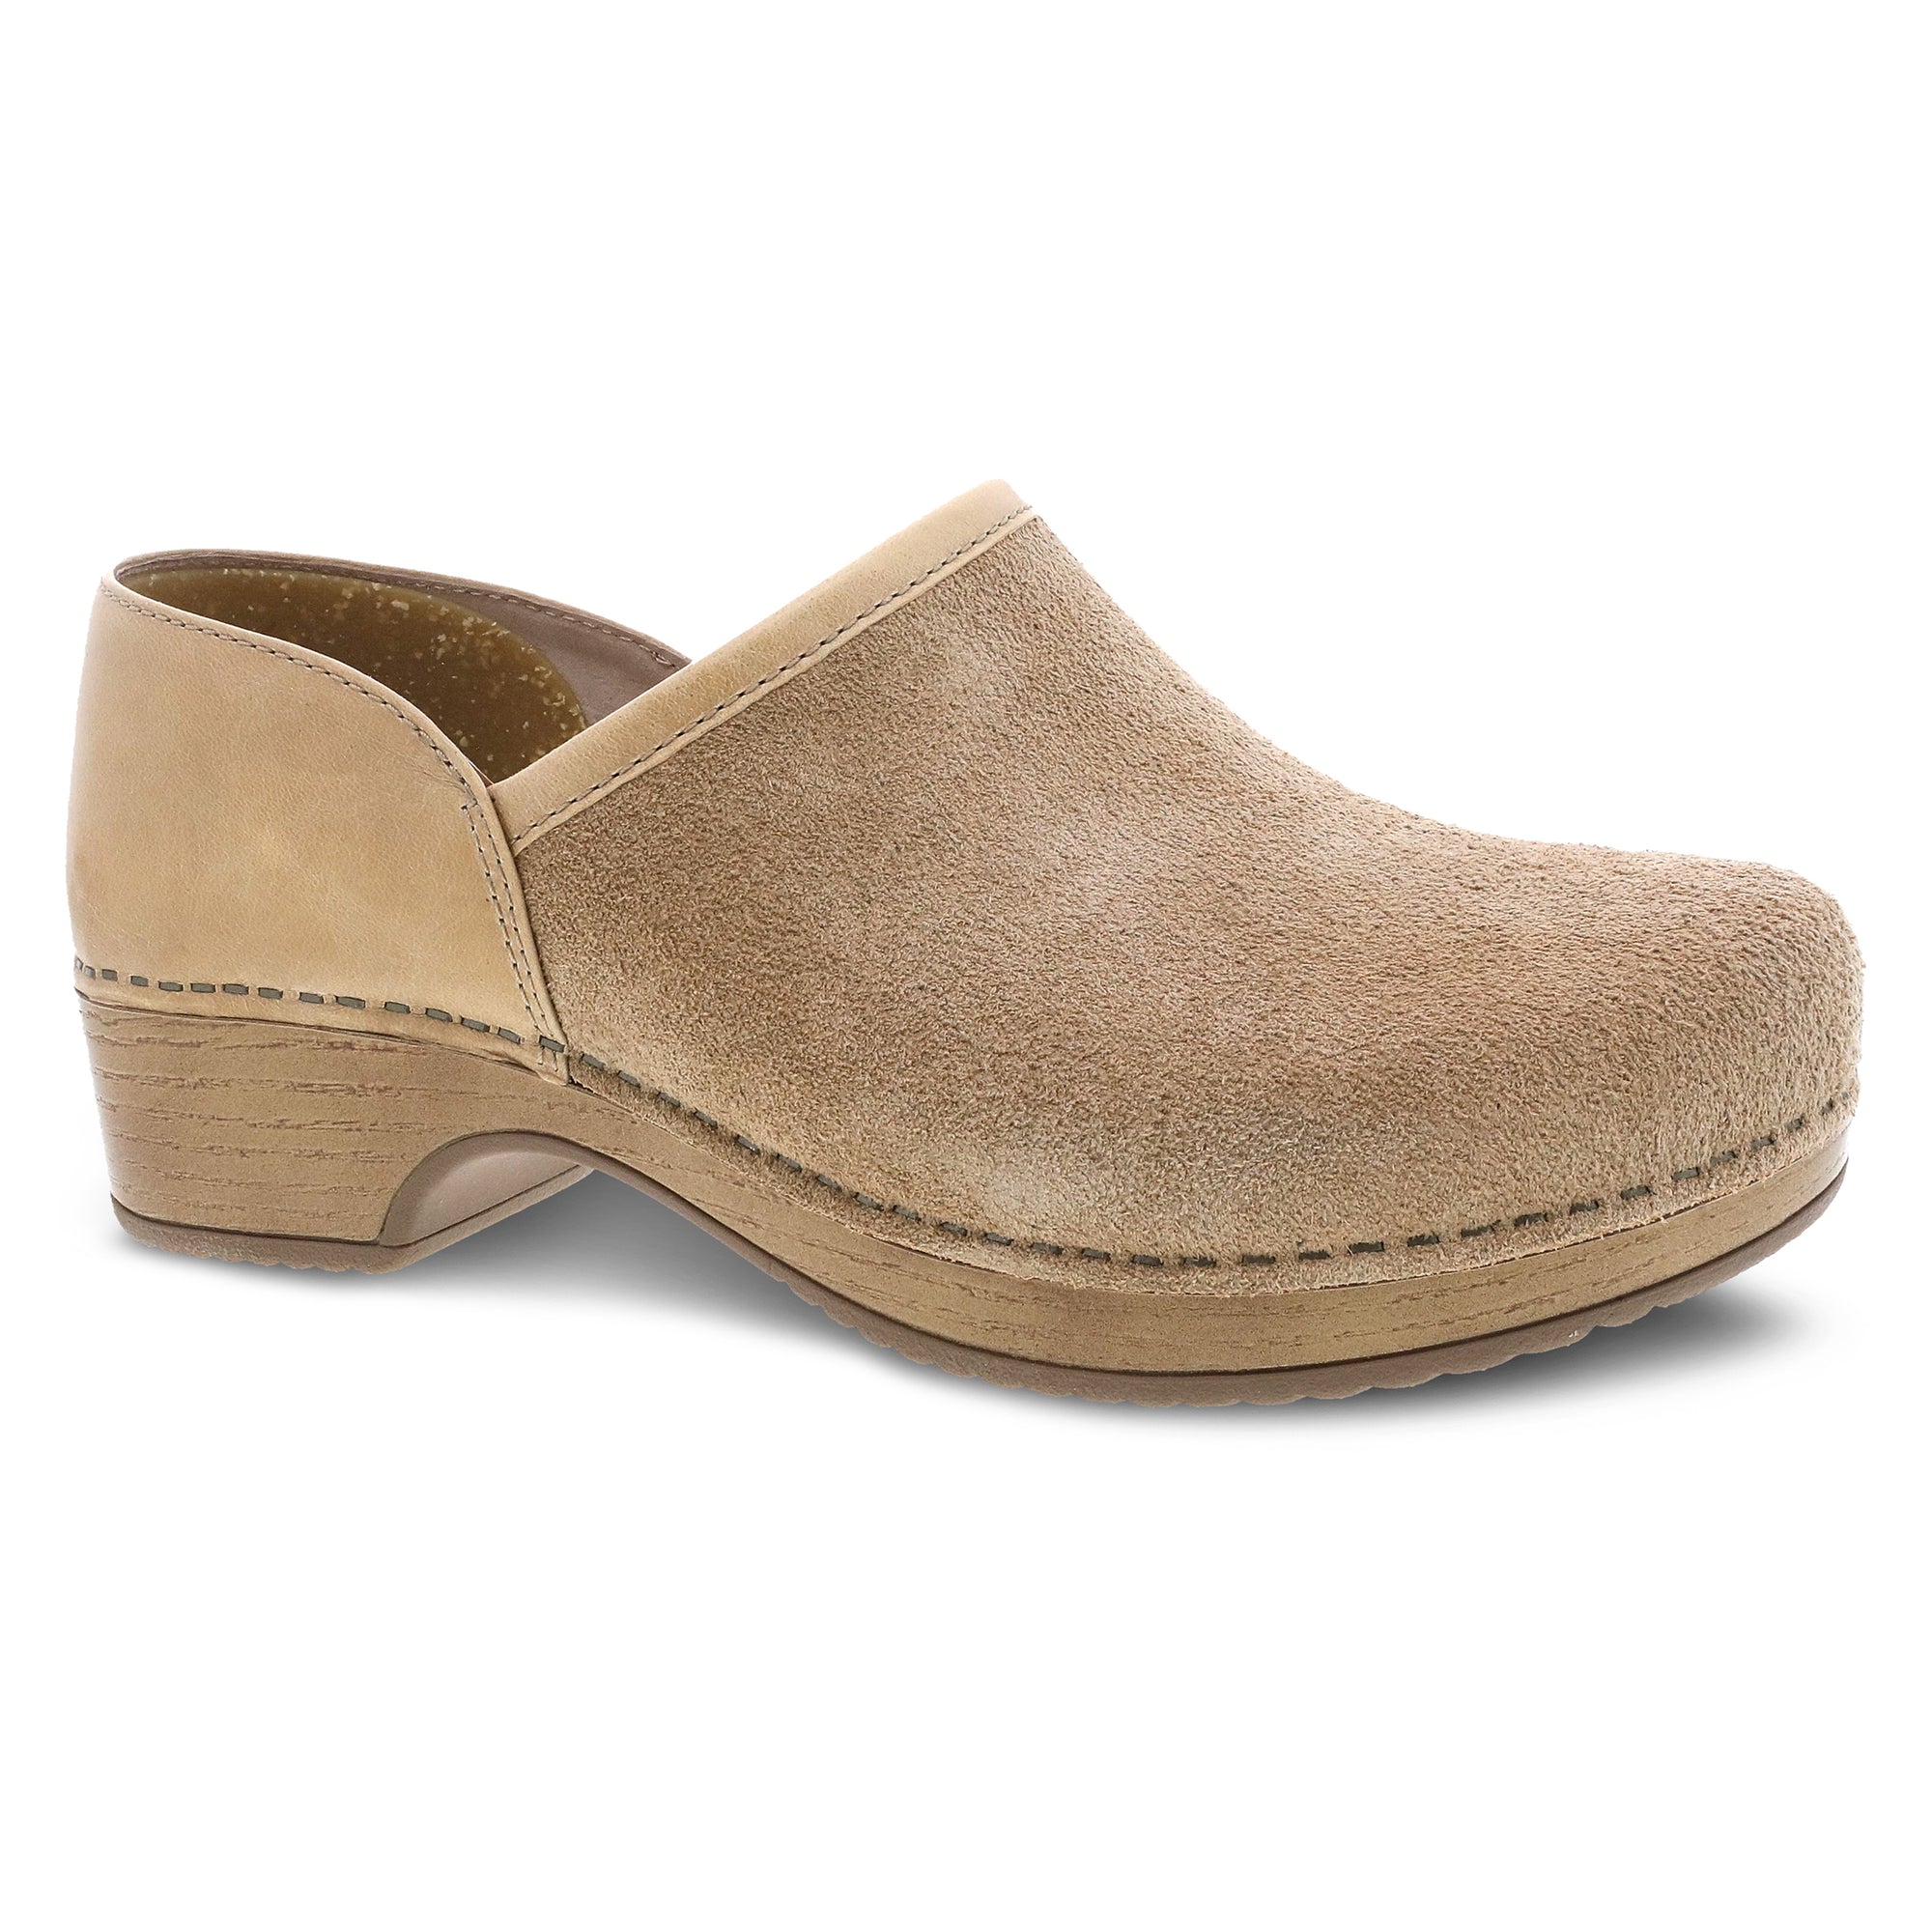 Primary image of Brenna Sand Full Grain Suede